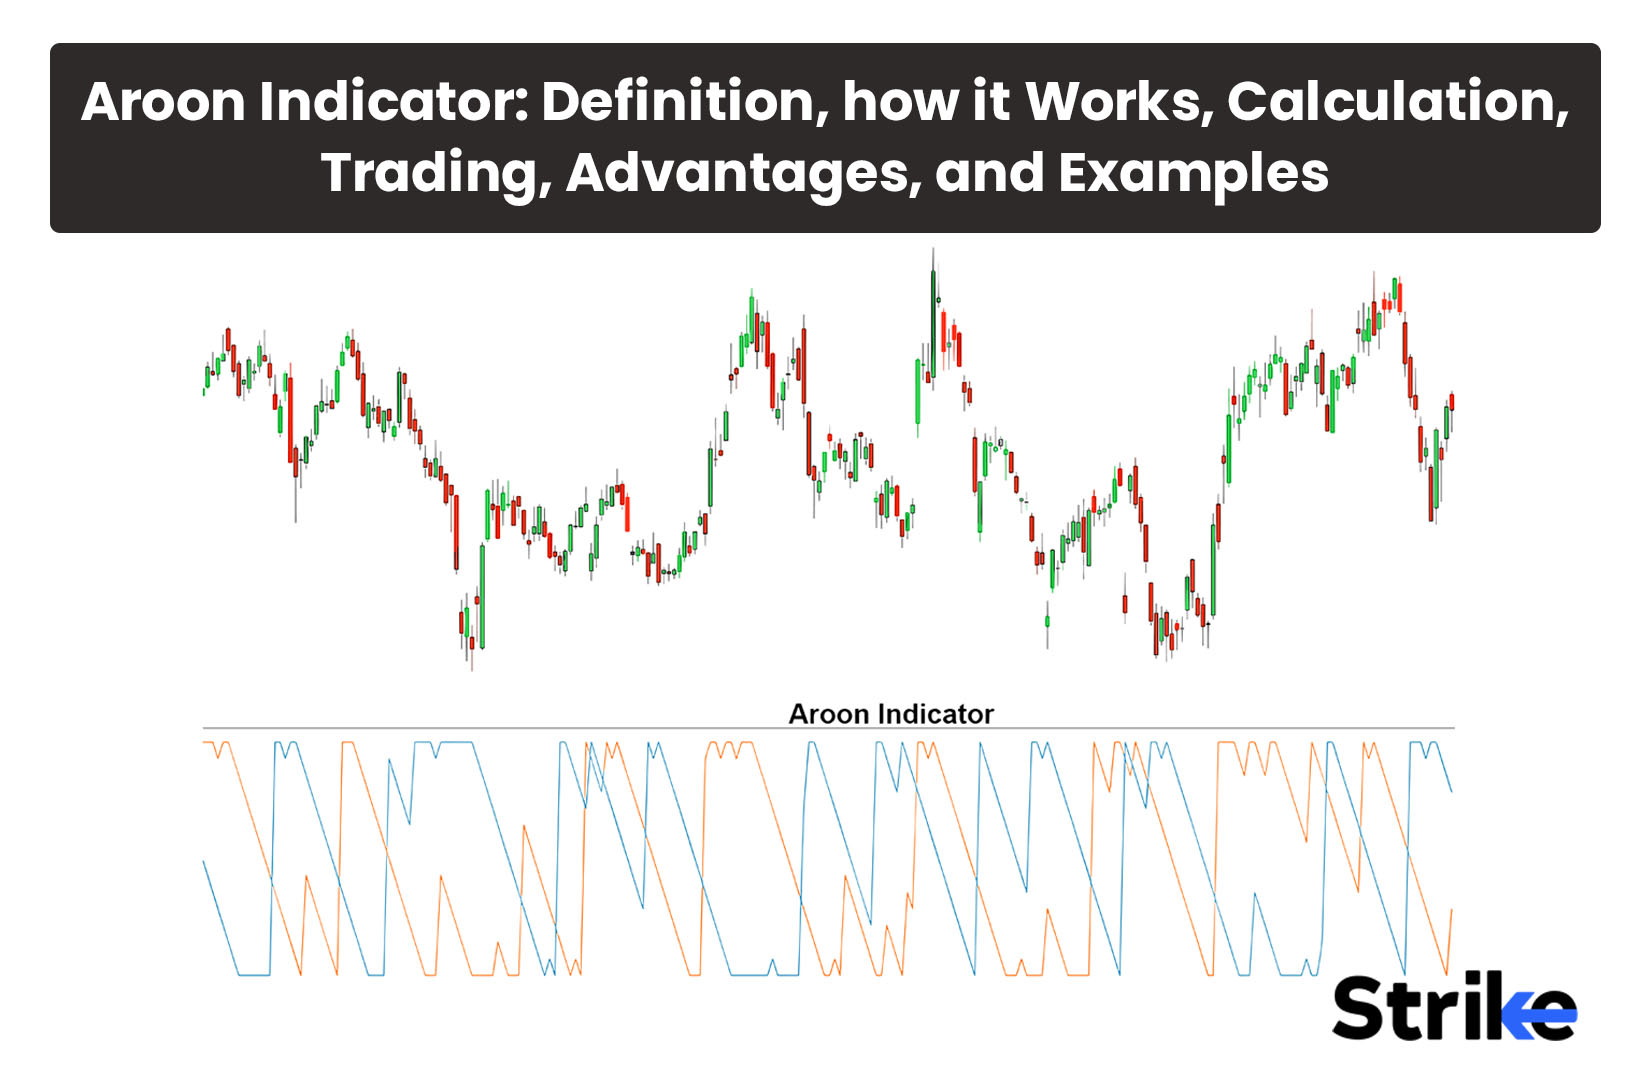 Aroon Indicator: Definition, how it Works, Calculation, Trading, Advantages, and Examples